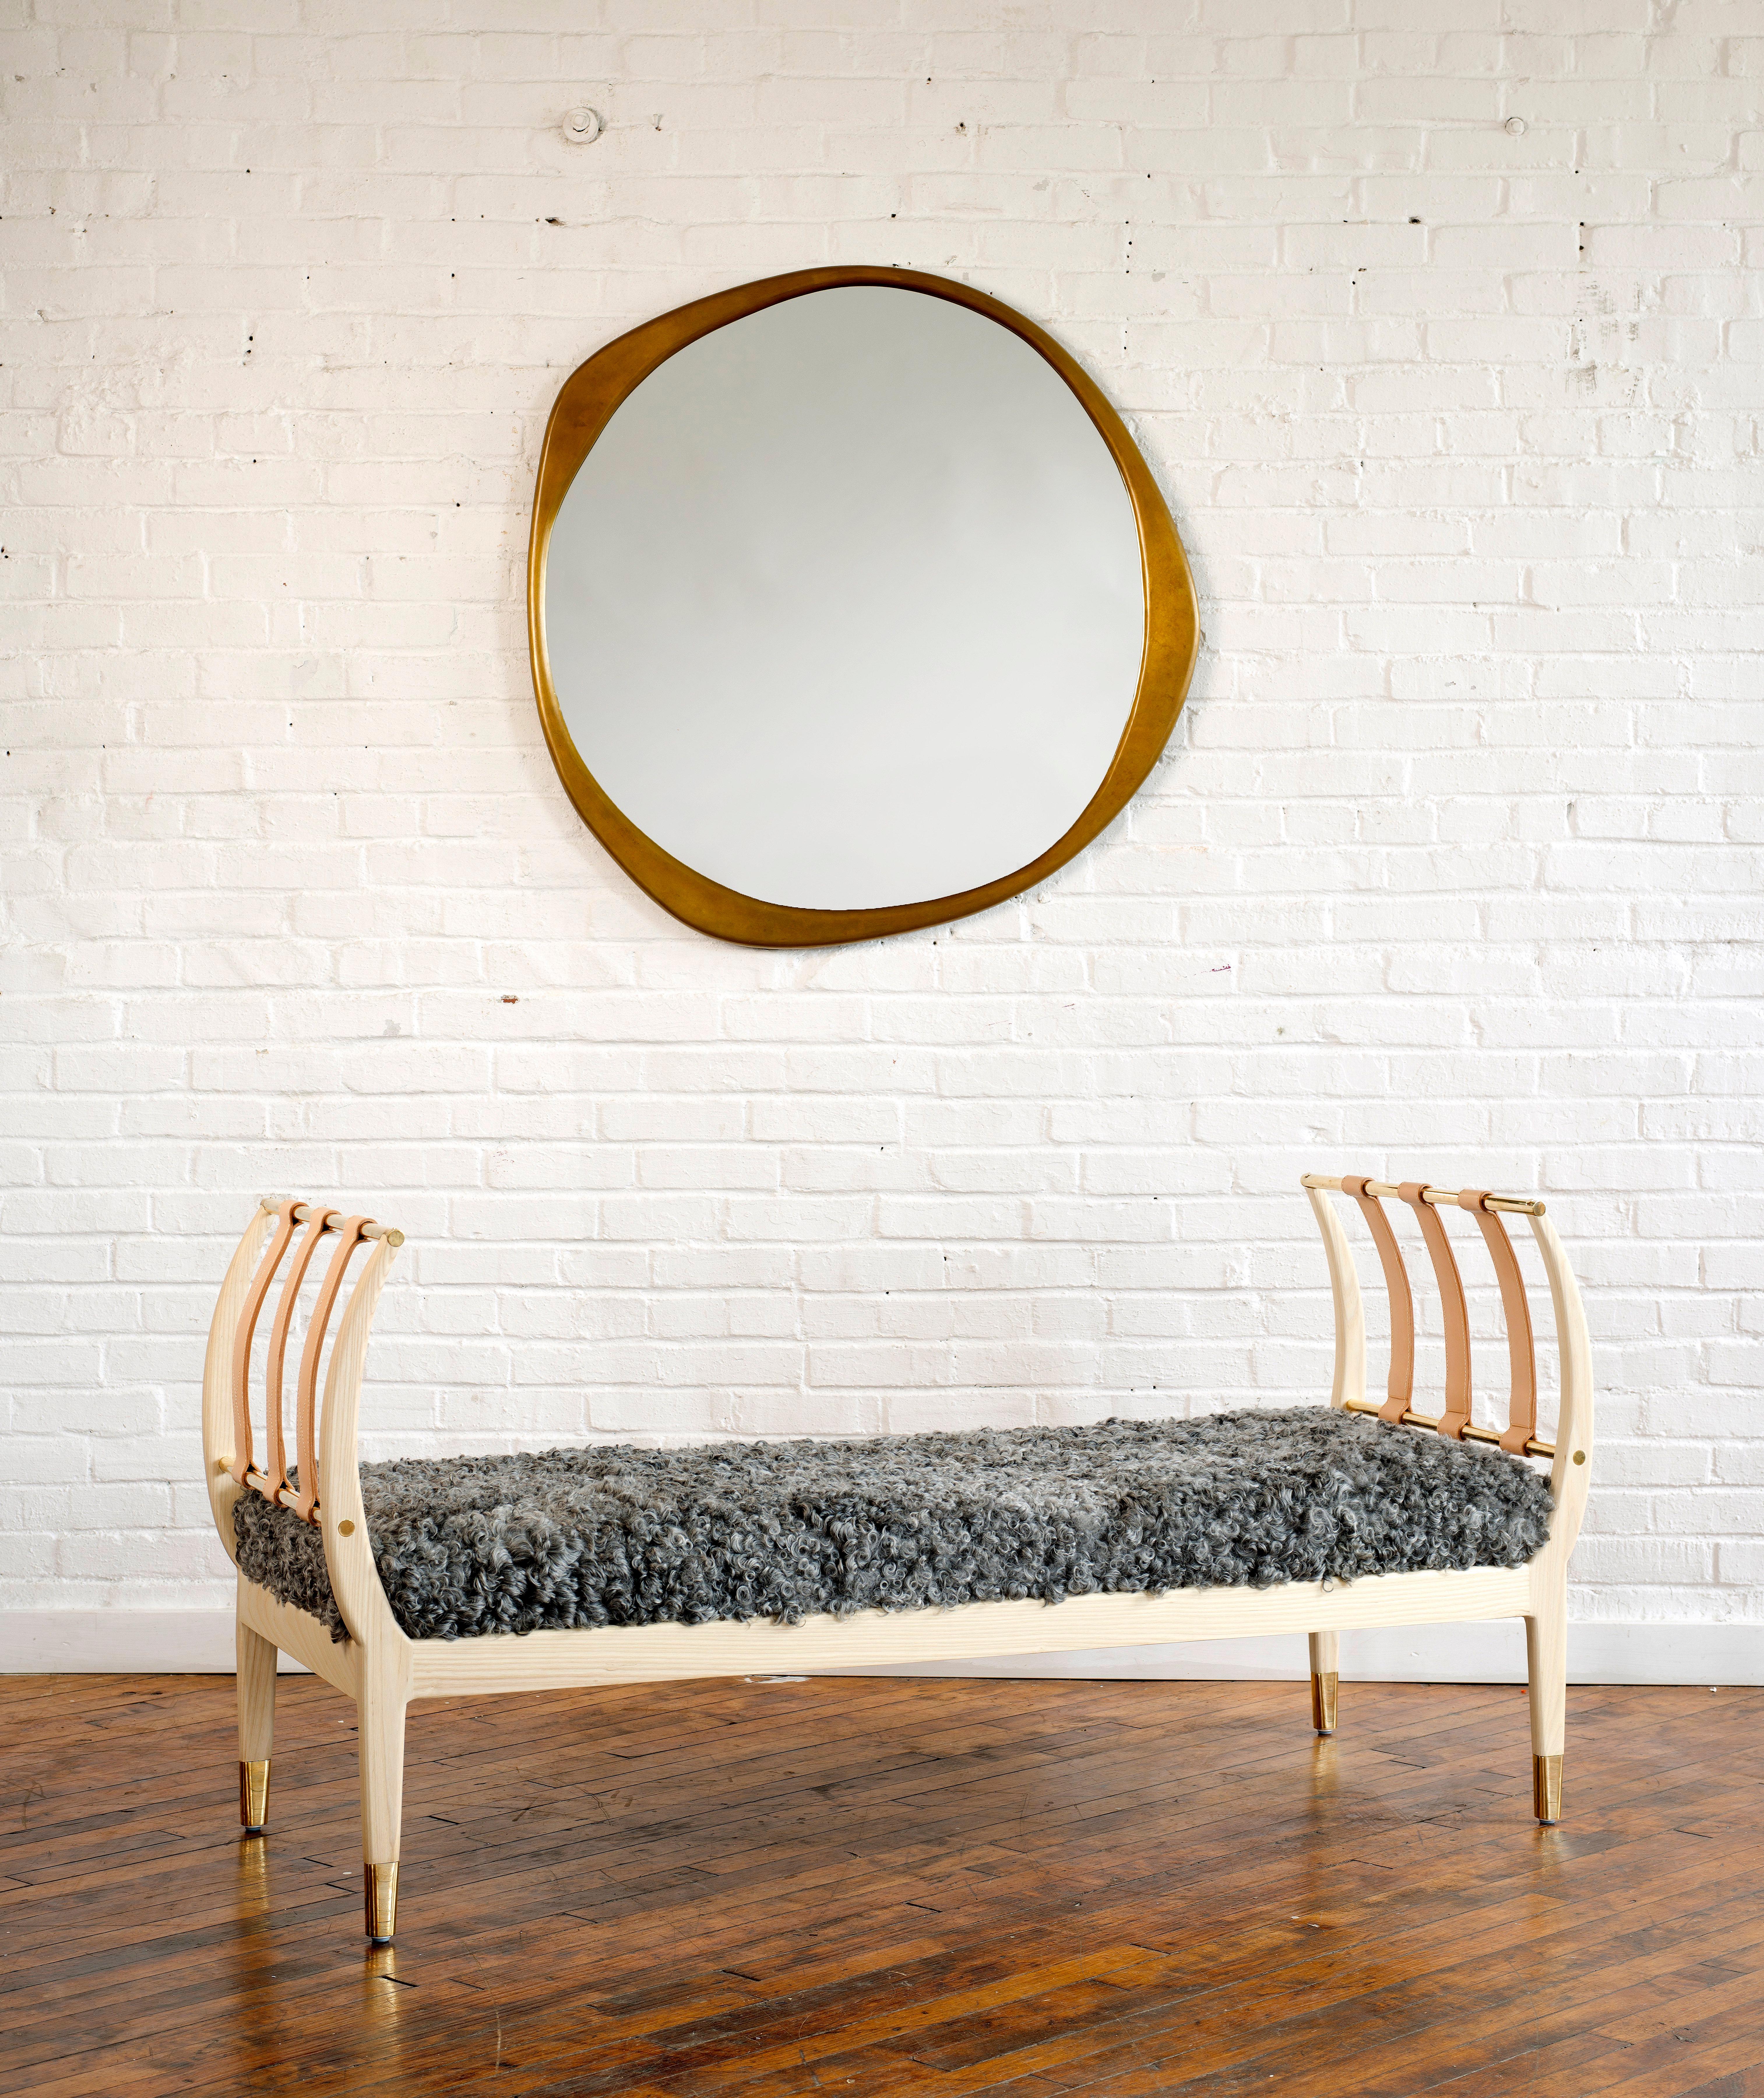 Inspired by the rib of a whale, our Rib Bench features curved lines that are graceful, yet solid and strong. This piece enhances any living space with its sculptural form and unmistakable function. This handcrafted bench is made with traditional